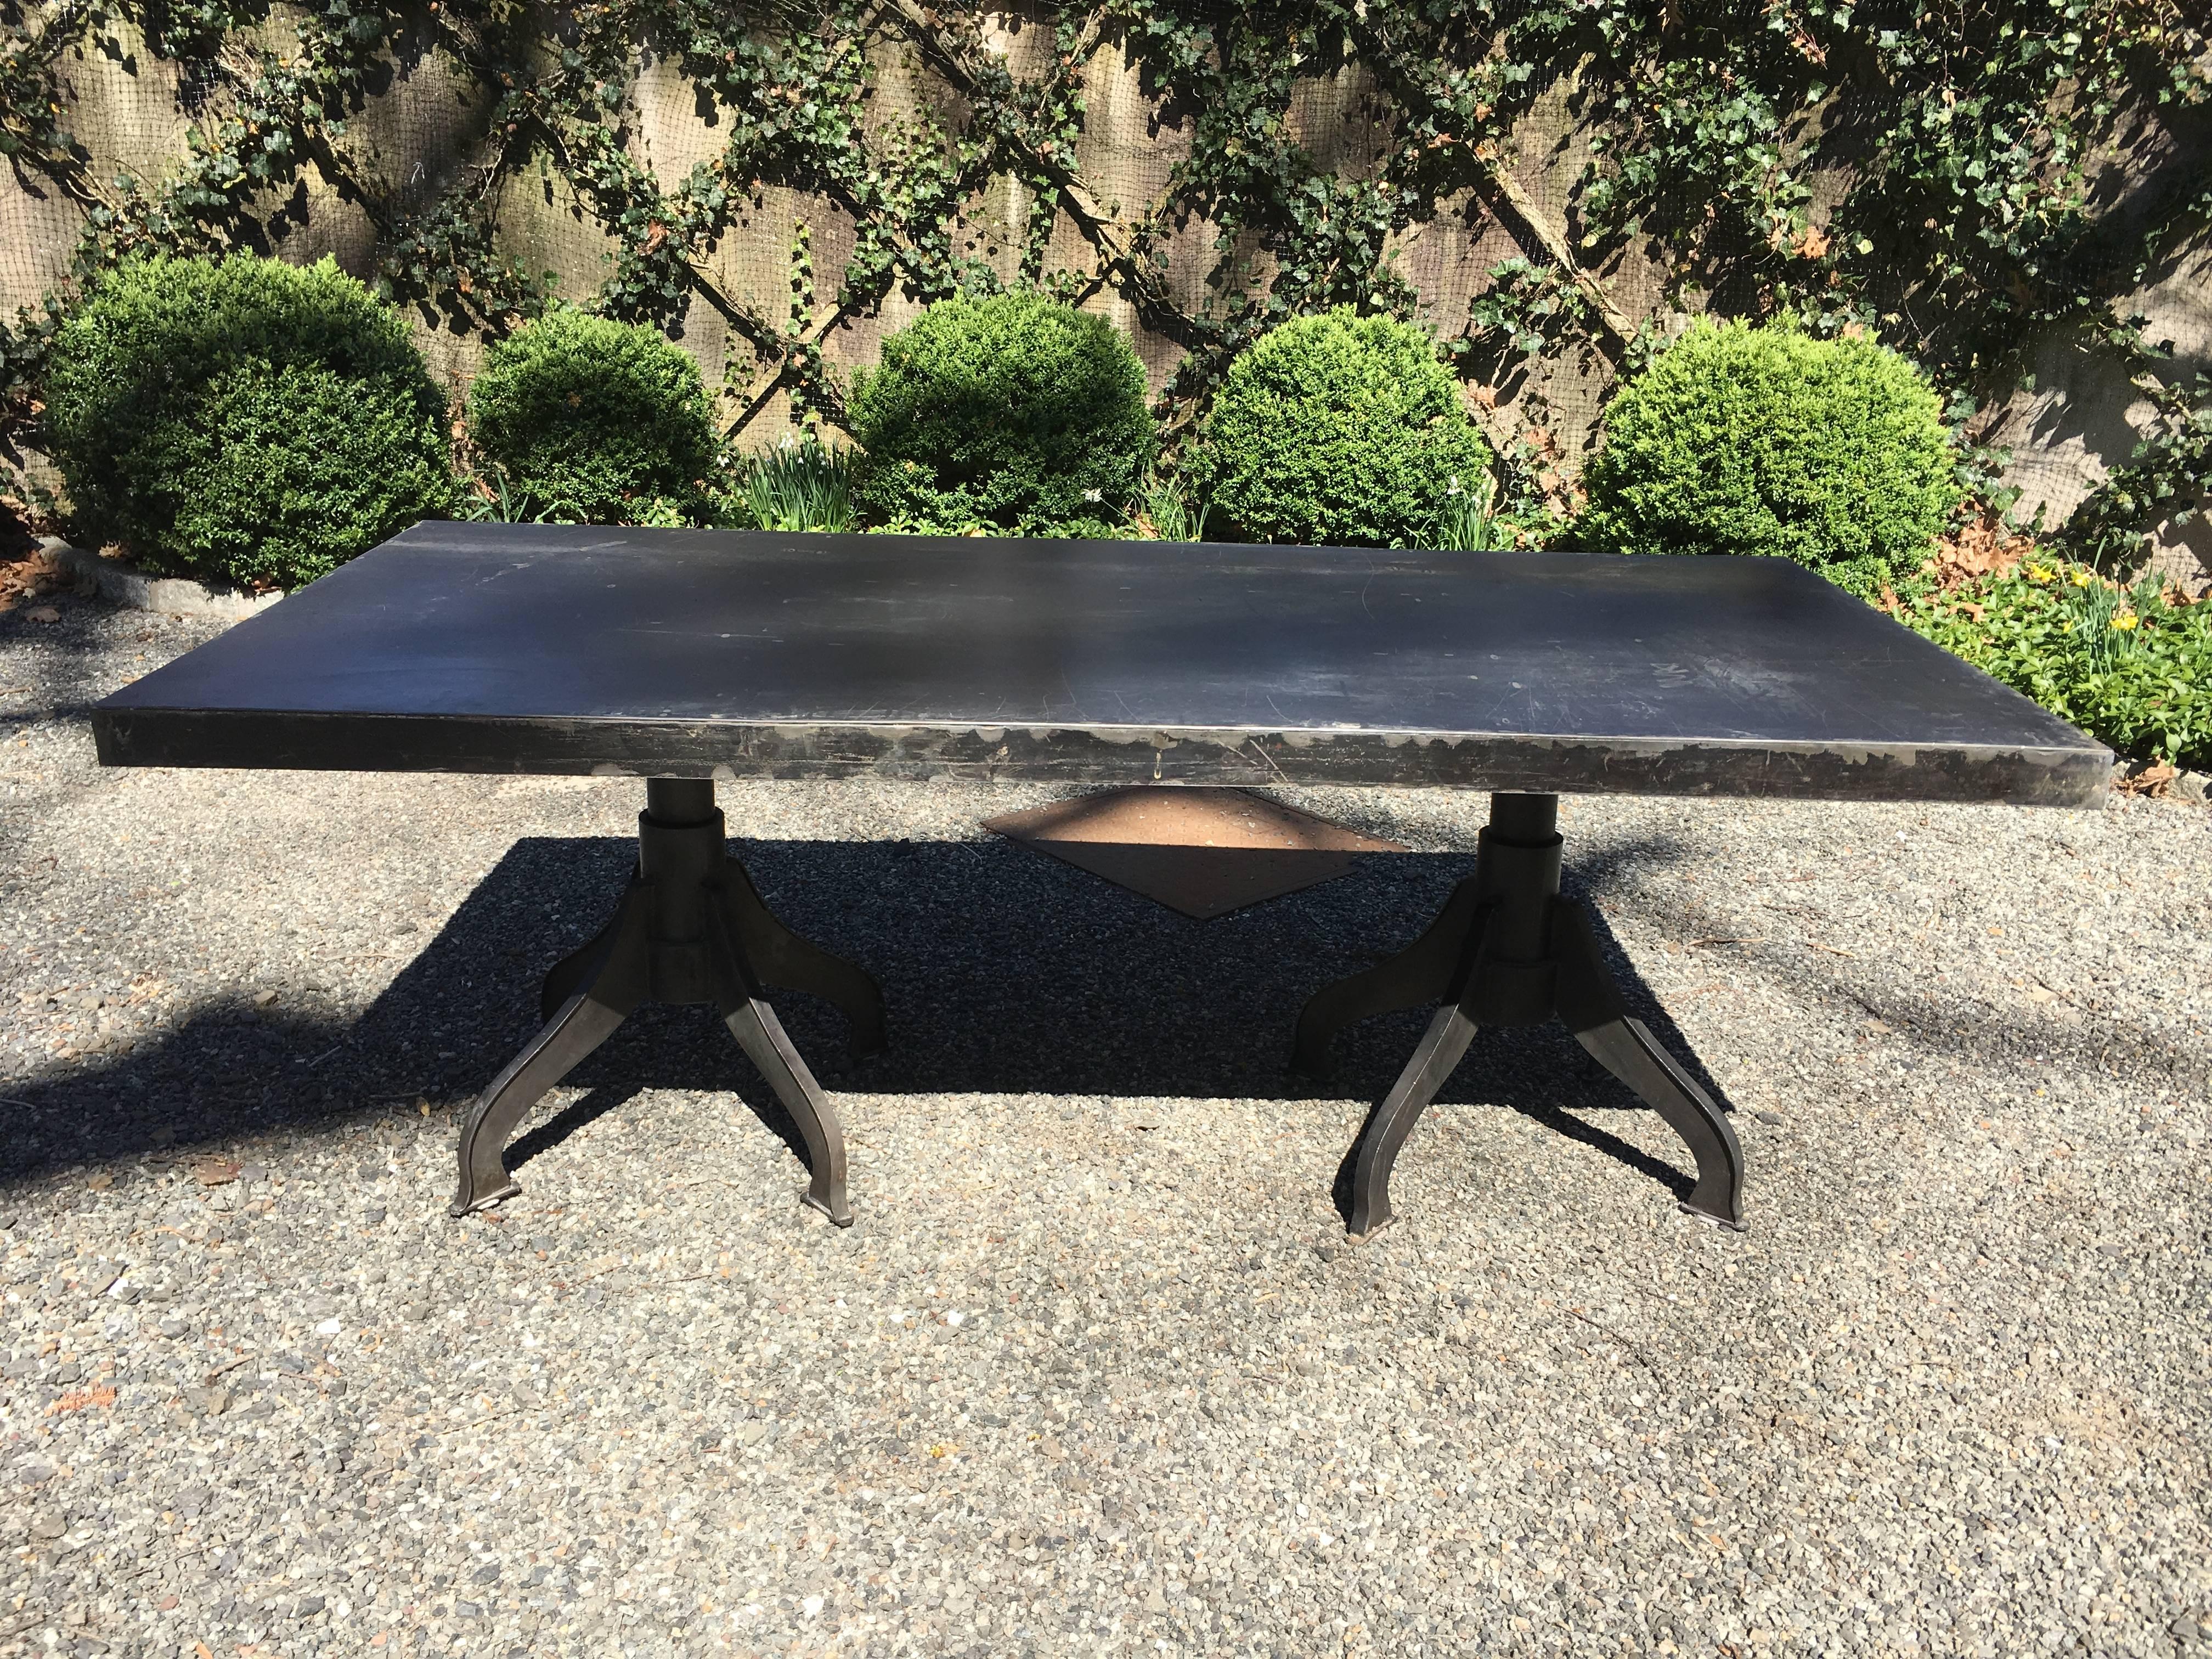 Amazing one-of-a-kind heavy steel dining or workspace table with Industrial steel legs. The rich patina of the surface shows scratches and sanded areas that add to its funky look. Legs bolt to top. No manufacturer markings. Measures: Apron is 2.75